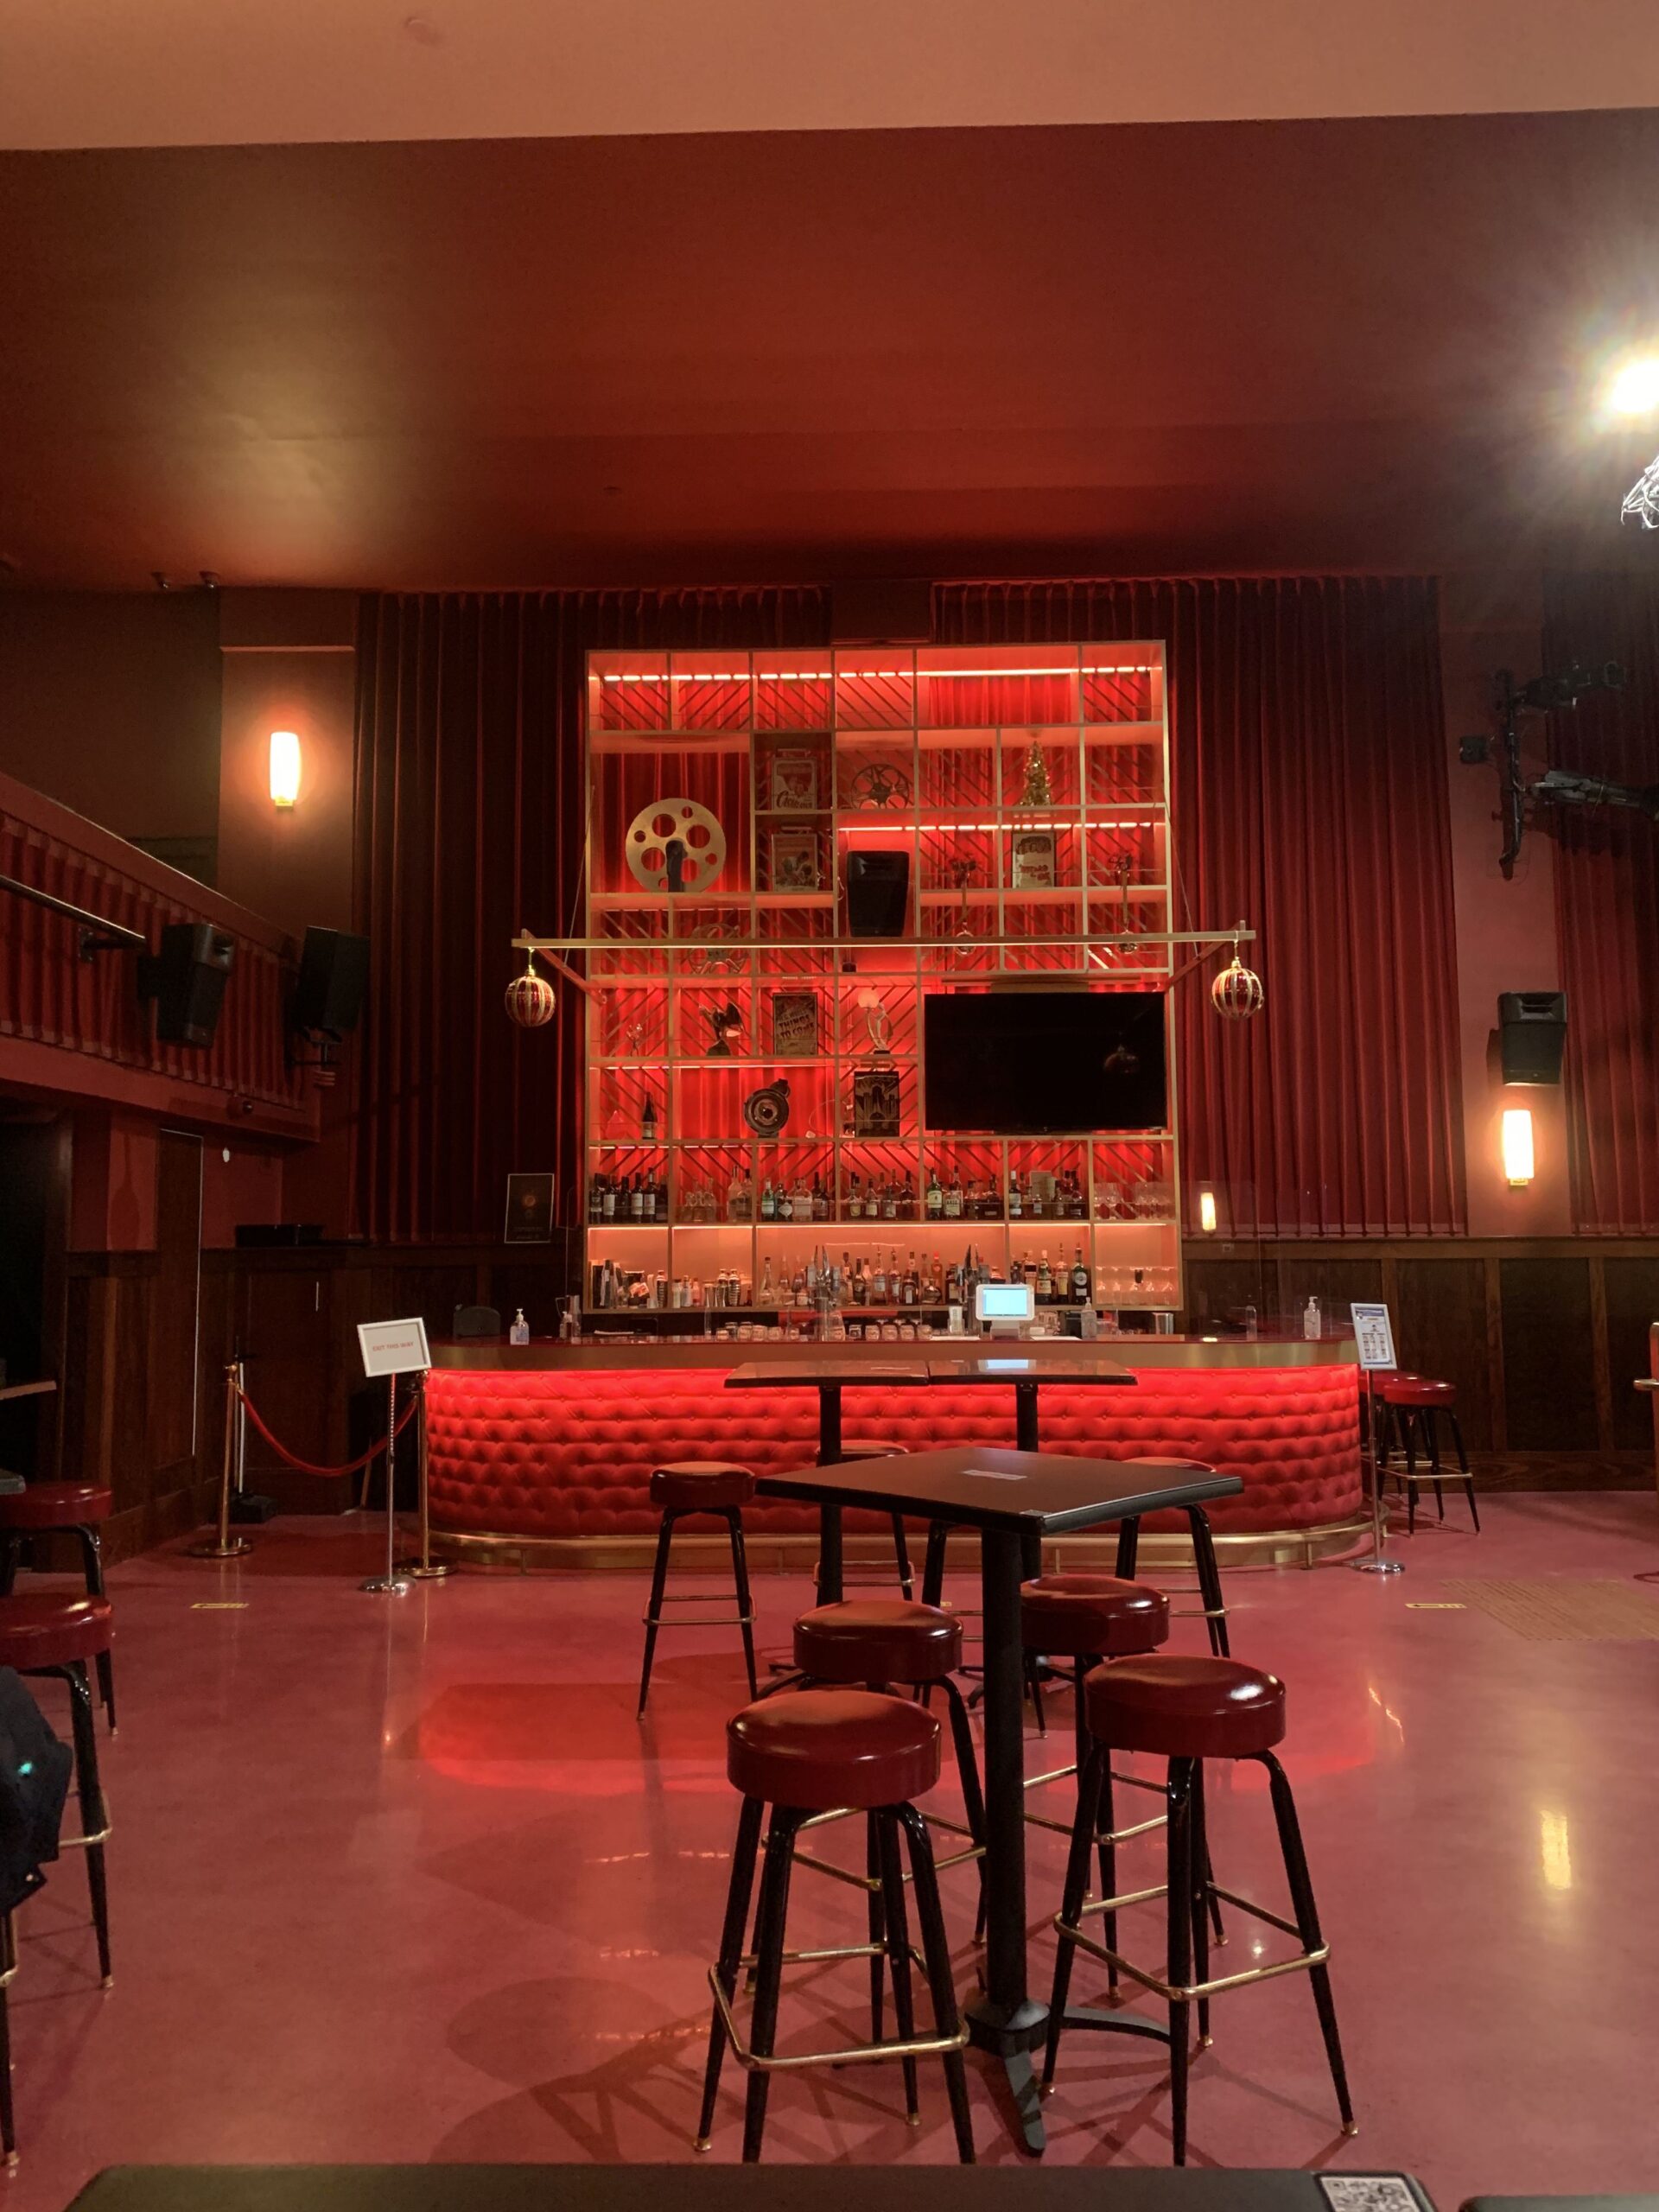 Interior of Hollywood Theatre lit red with view of the bar